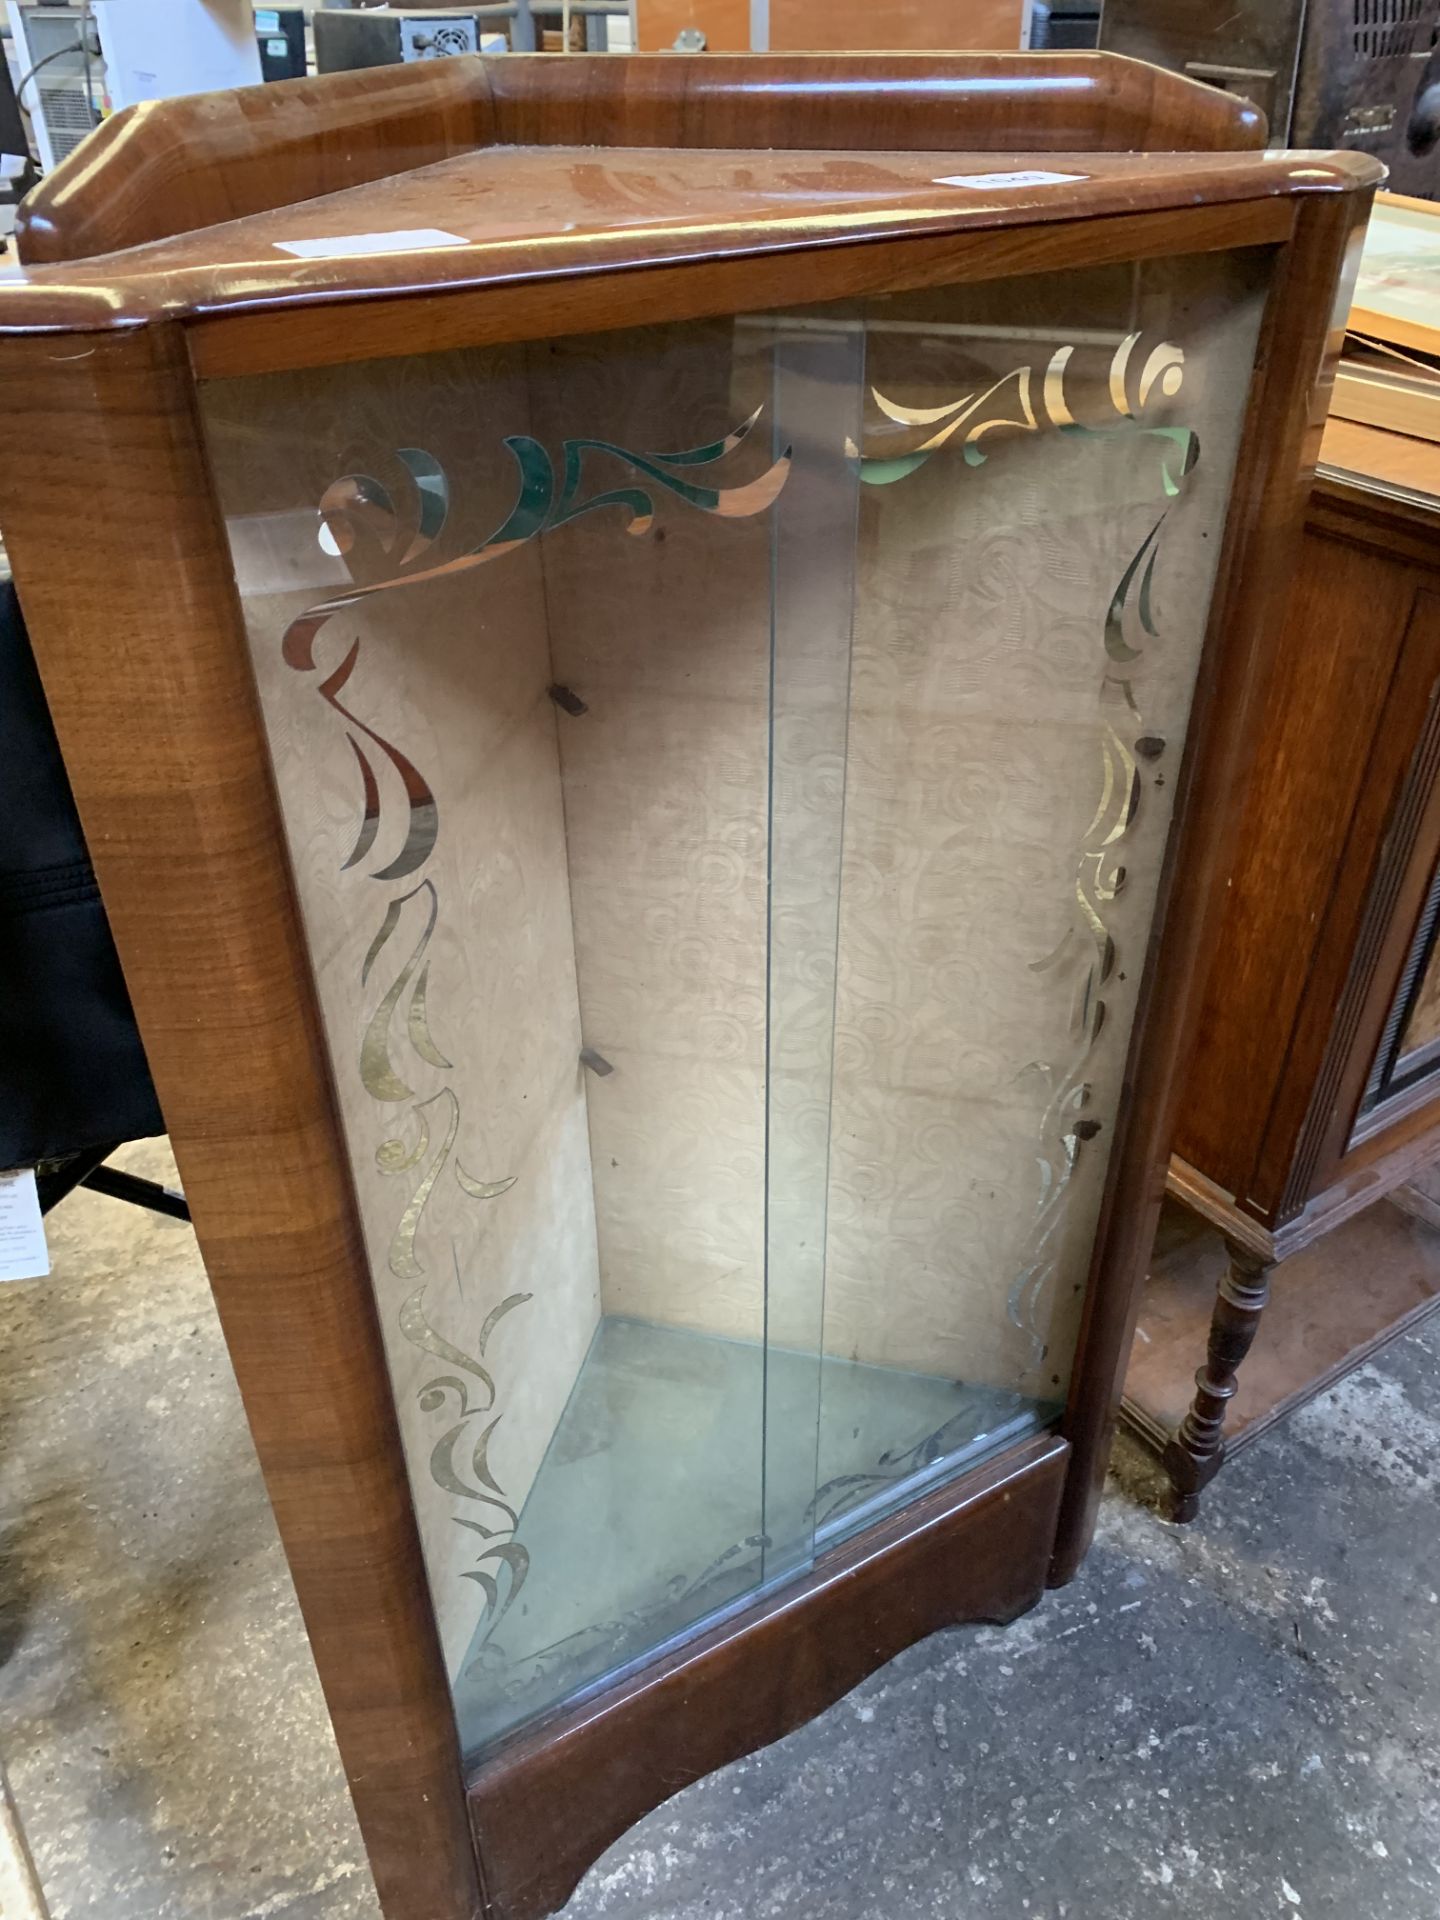 Glass fronted corner display cabinet.